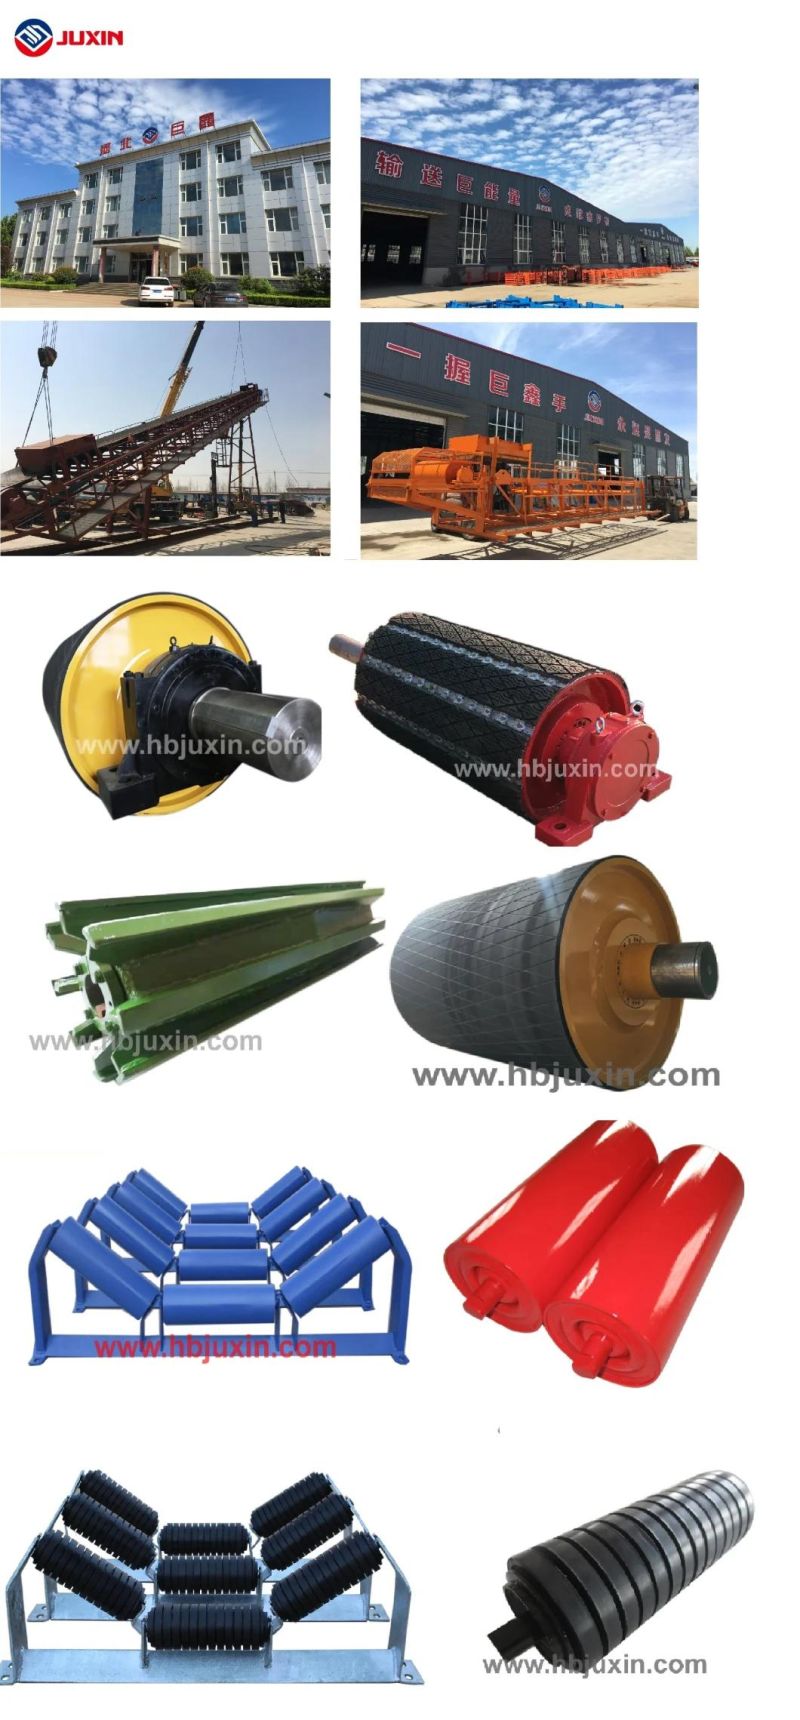 Cema Standard Idler Roll for Iron Steel Plant